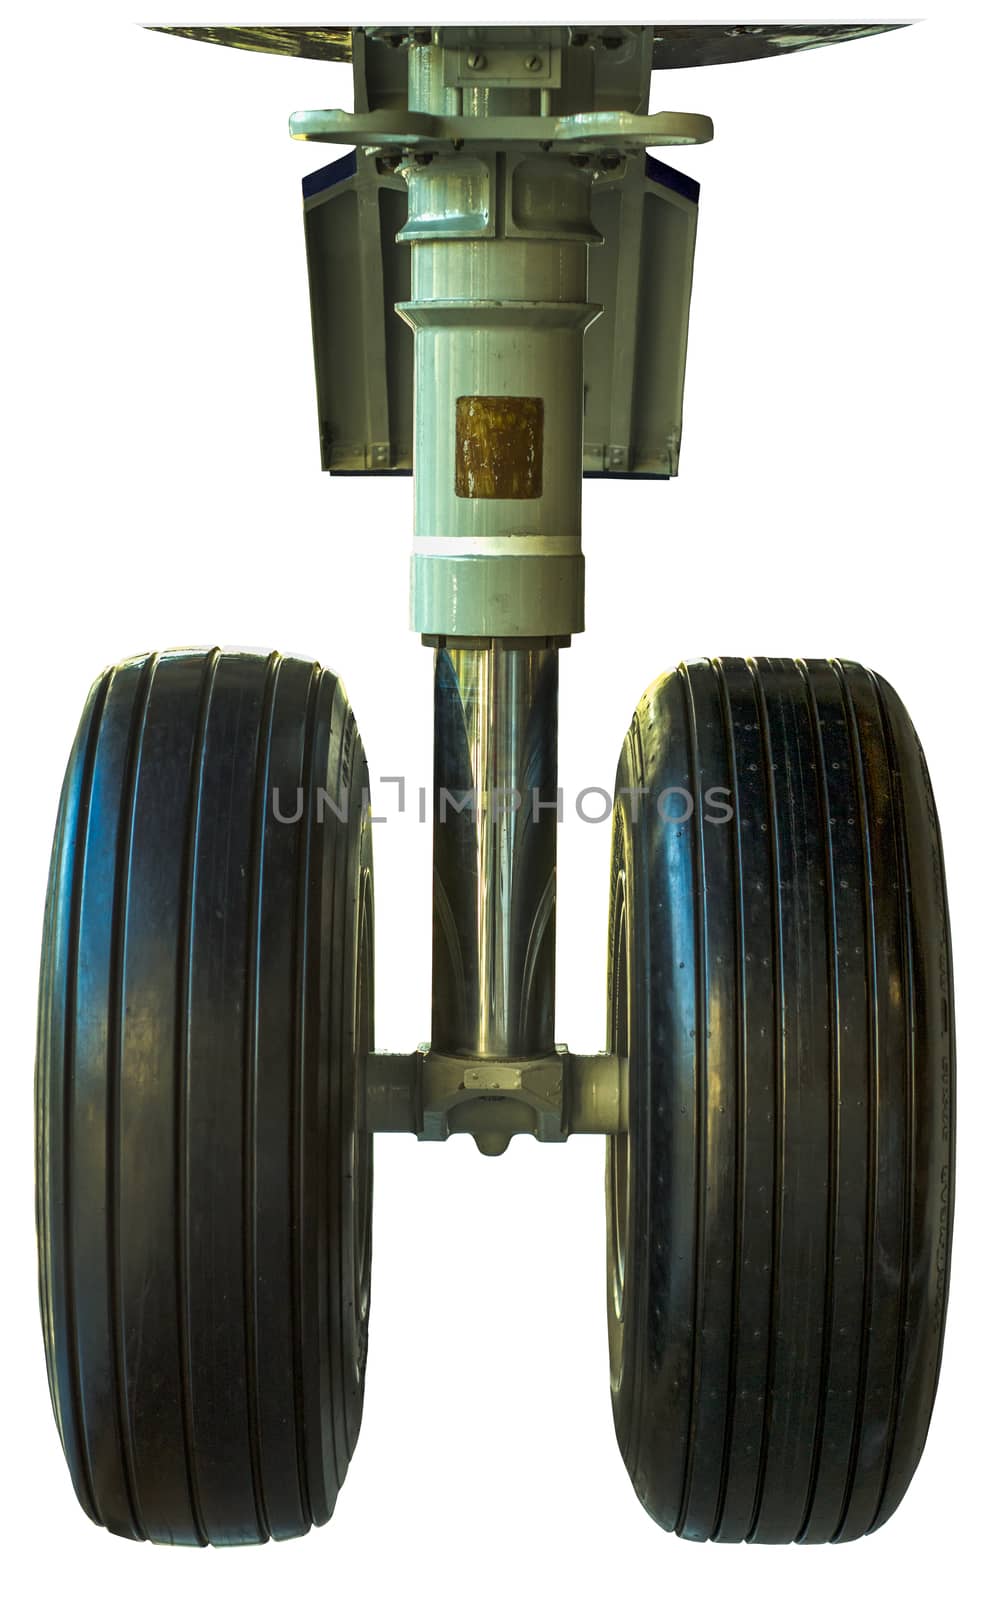 Isolated Image Of Airplane Wheels And Undercarriage